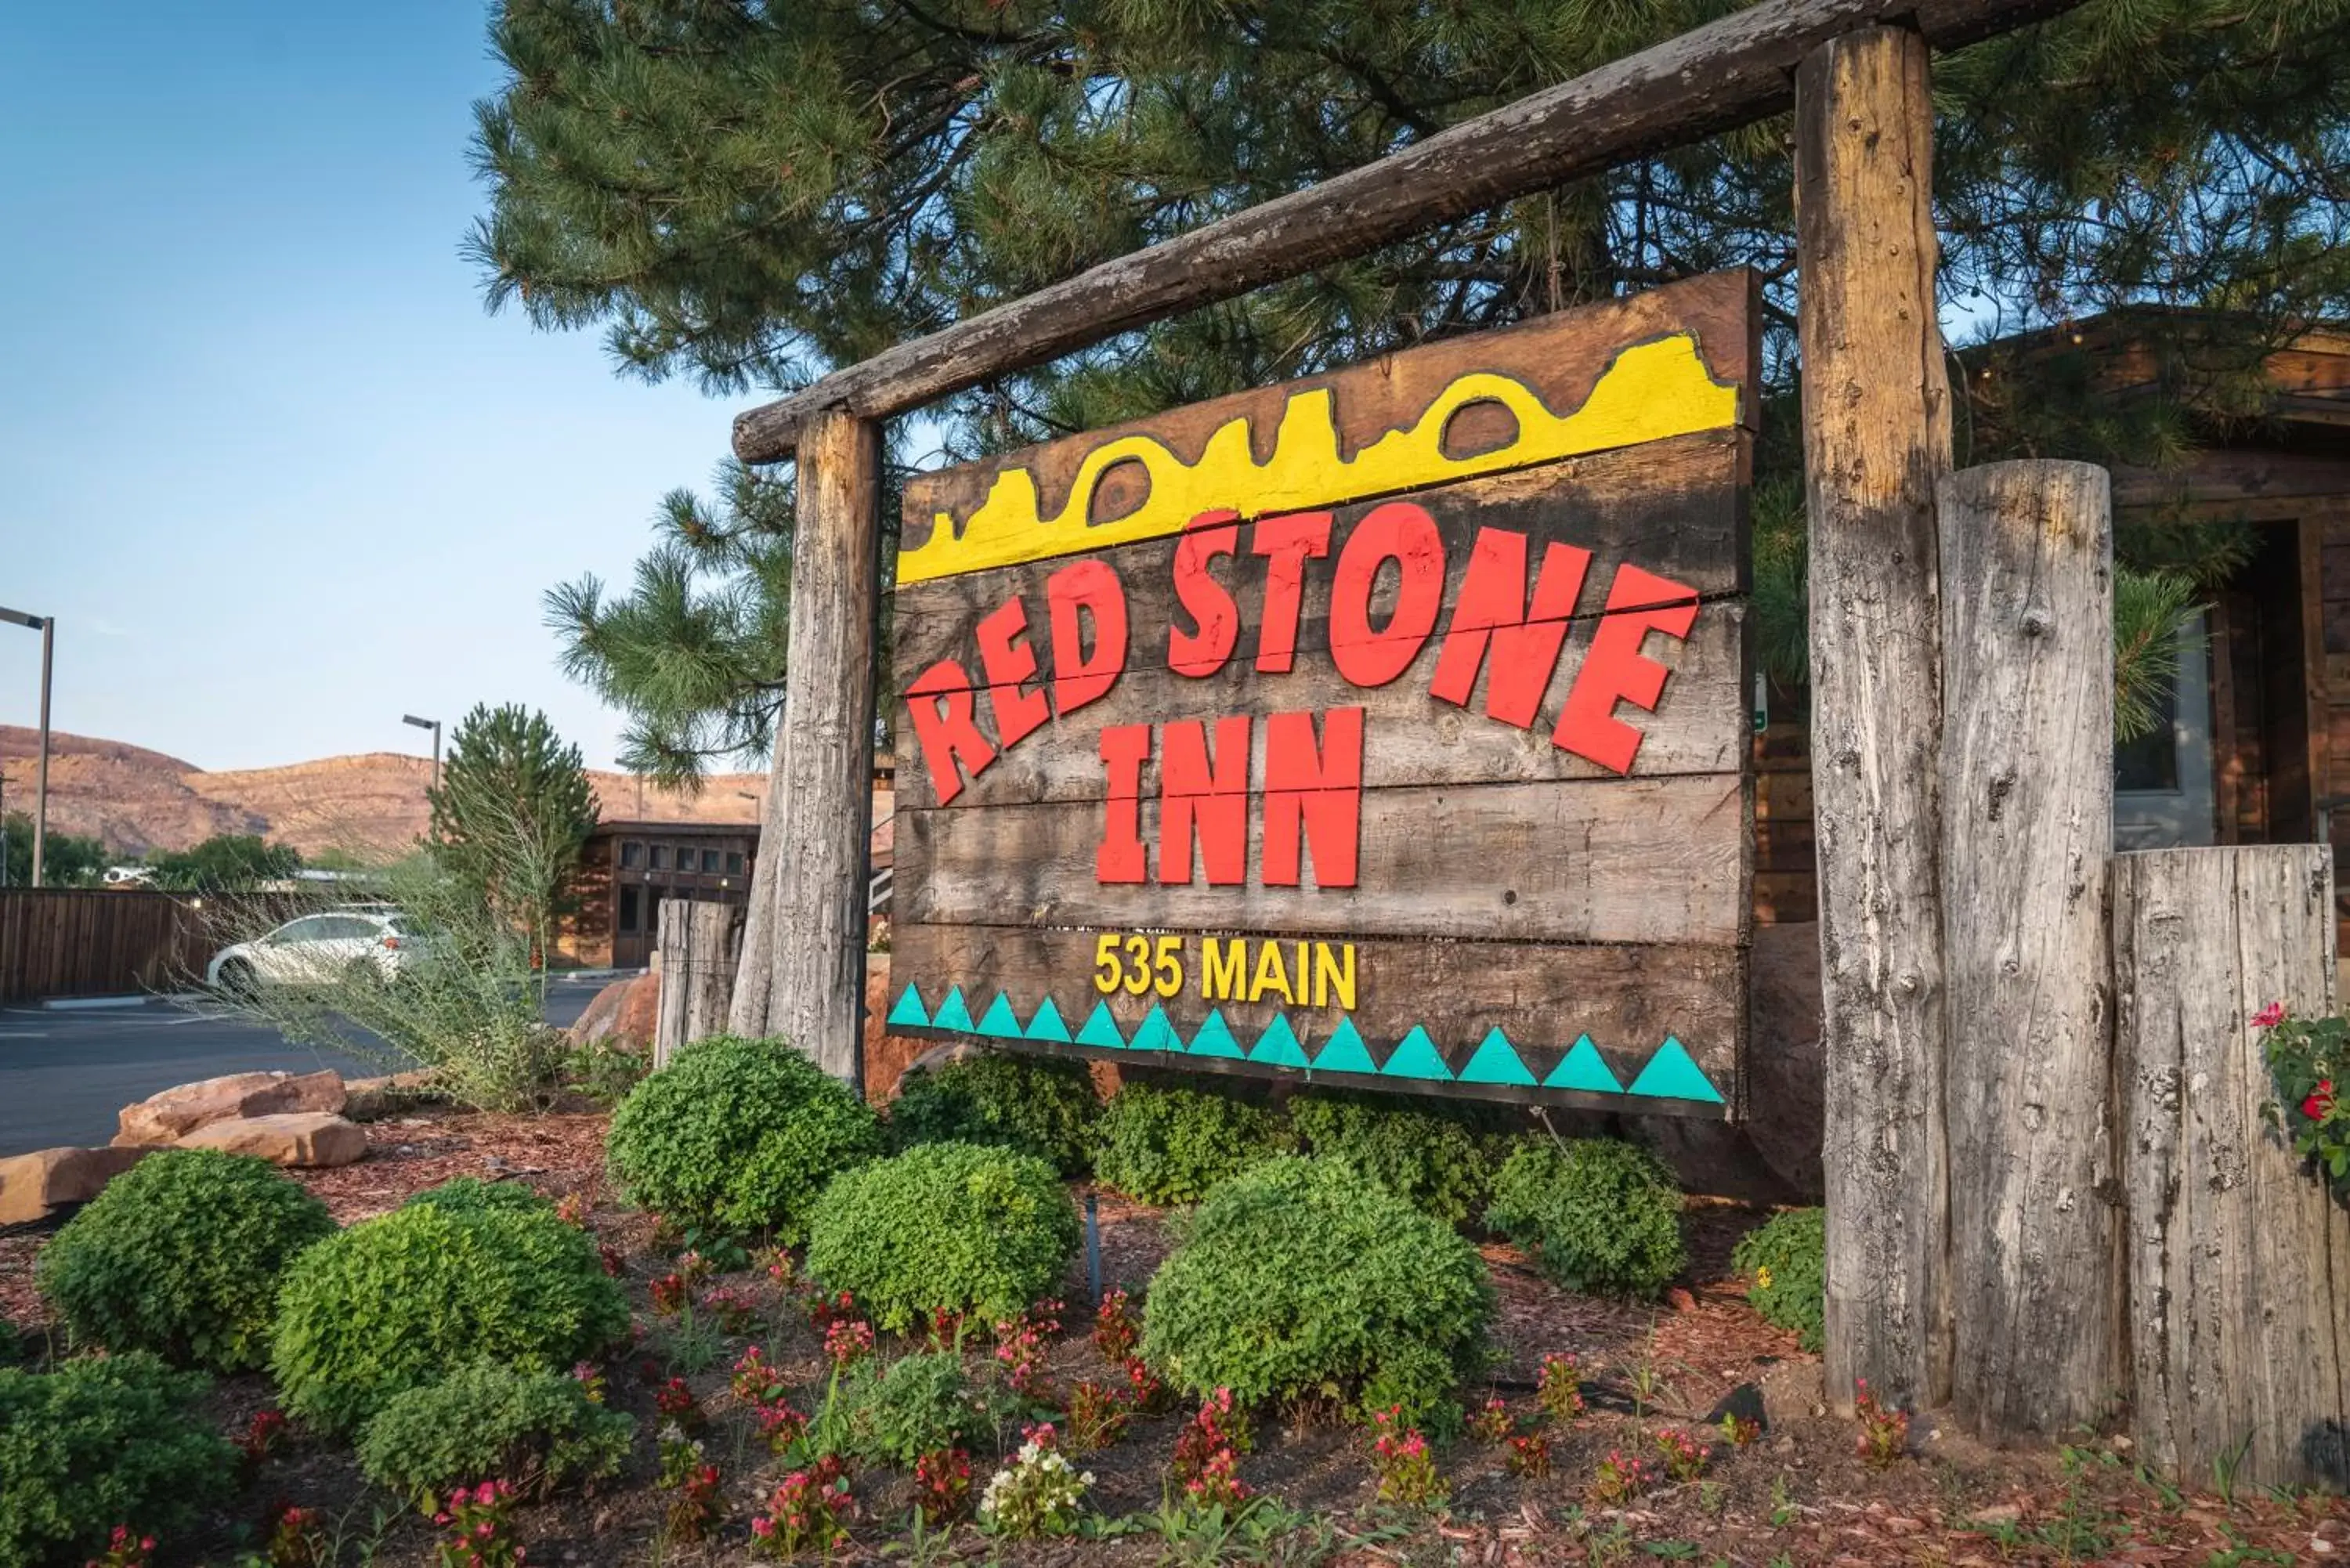 Property logo or sign in Red Stone Inn